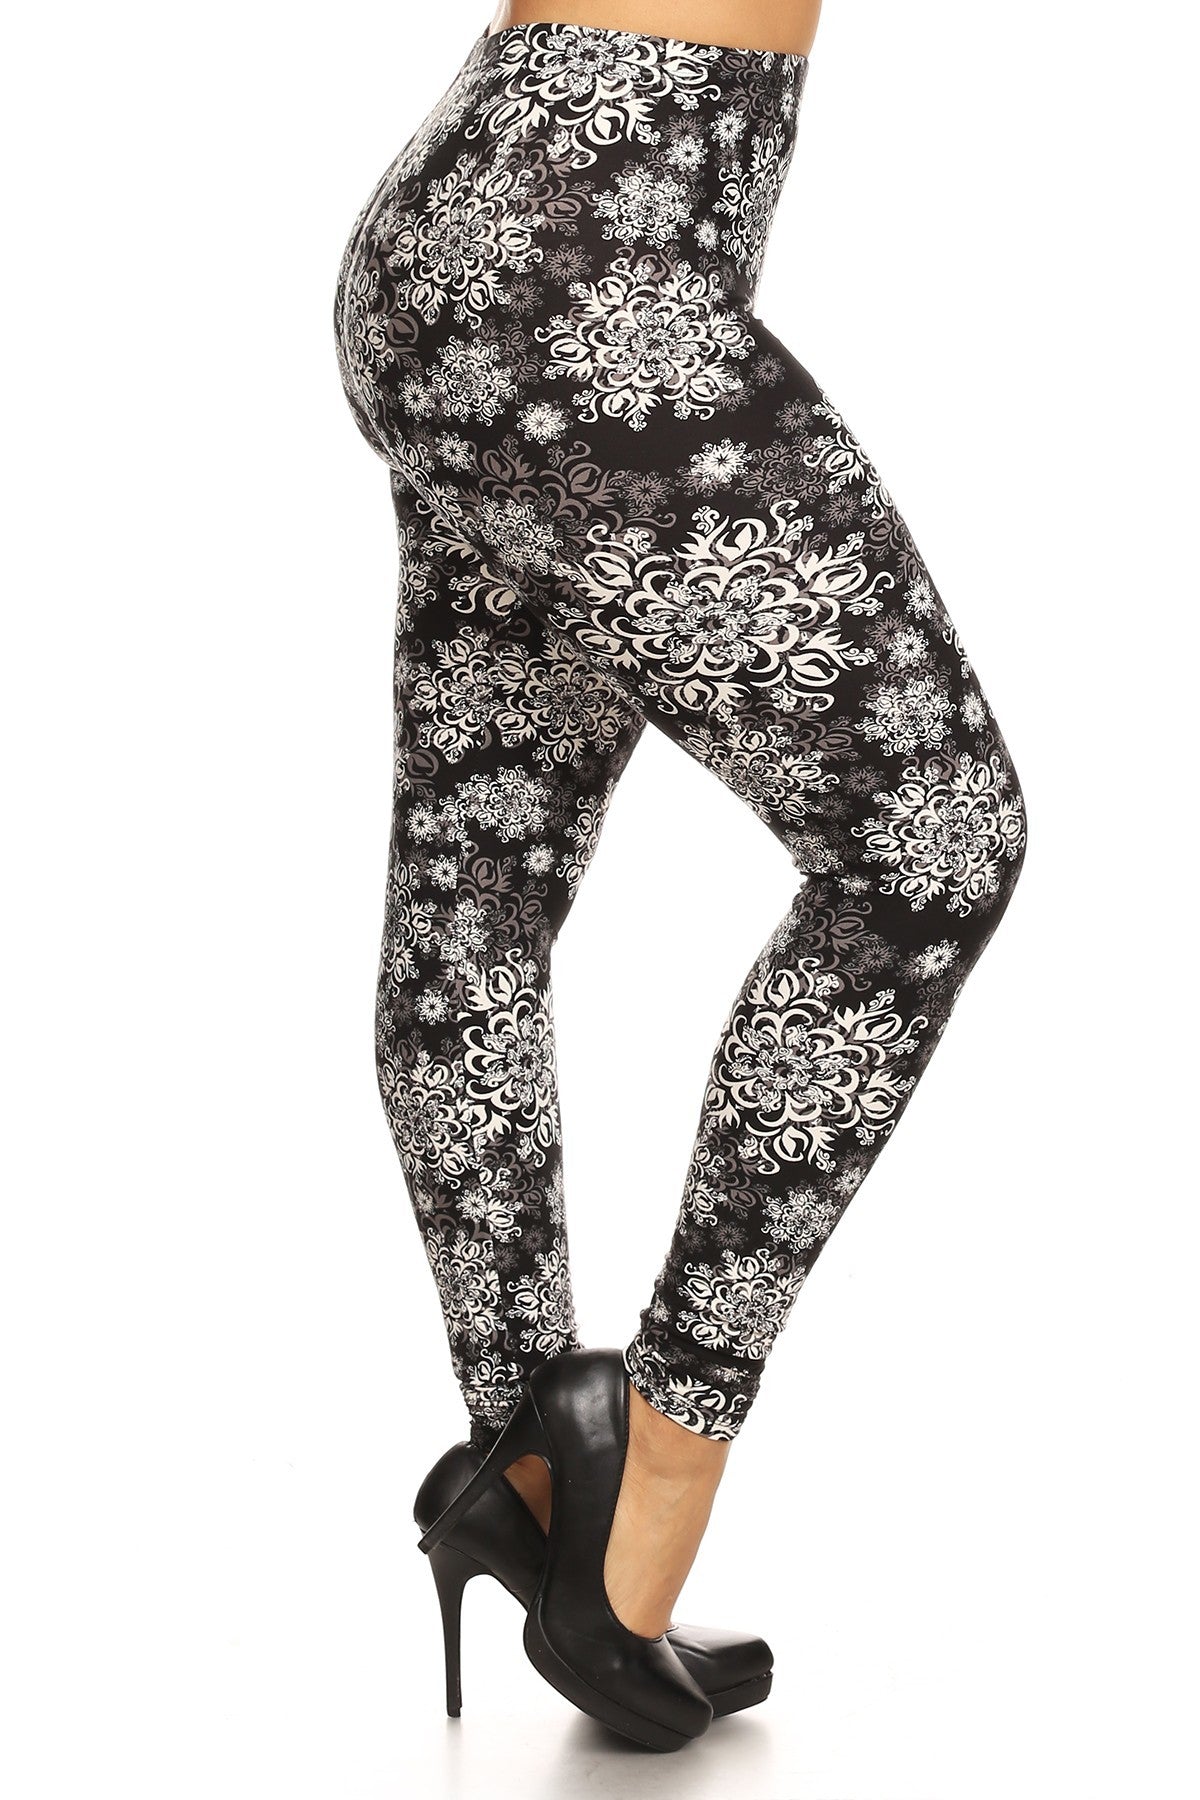 - Voluptuous (+) Plus Size Abstract Print, Full Length Leggings - Ships from The USA - womens leggings at TFC&H Co.